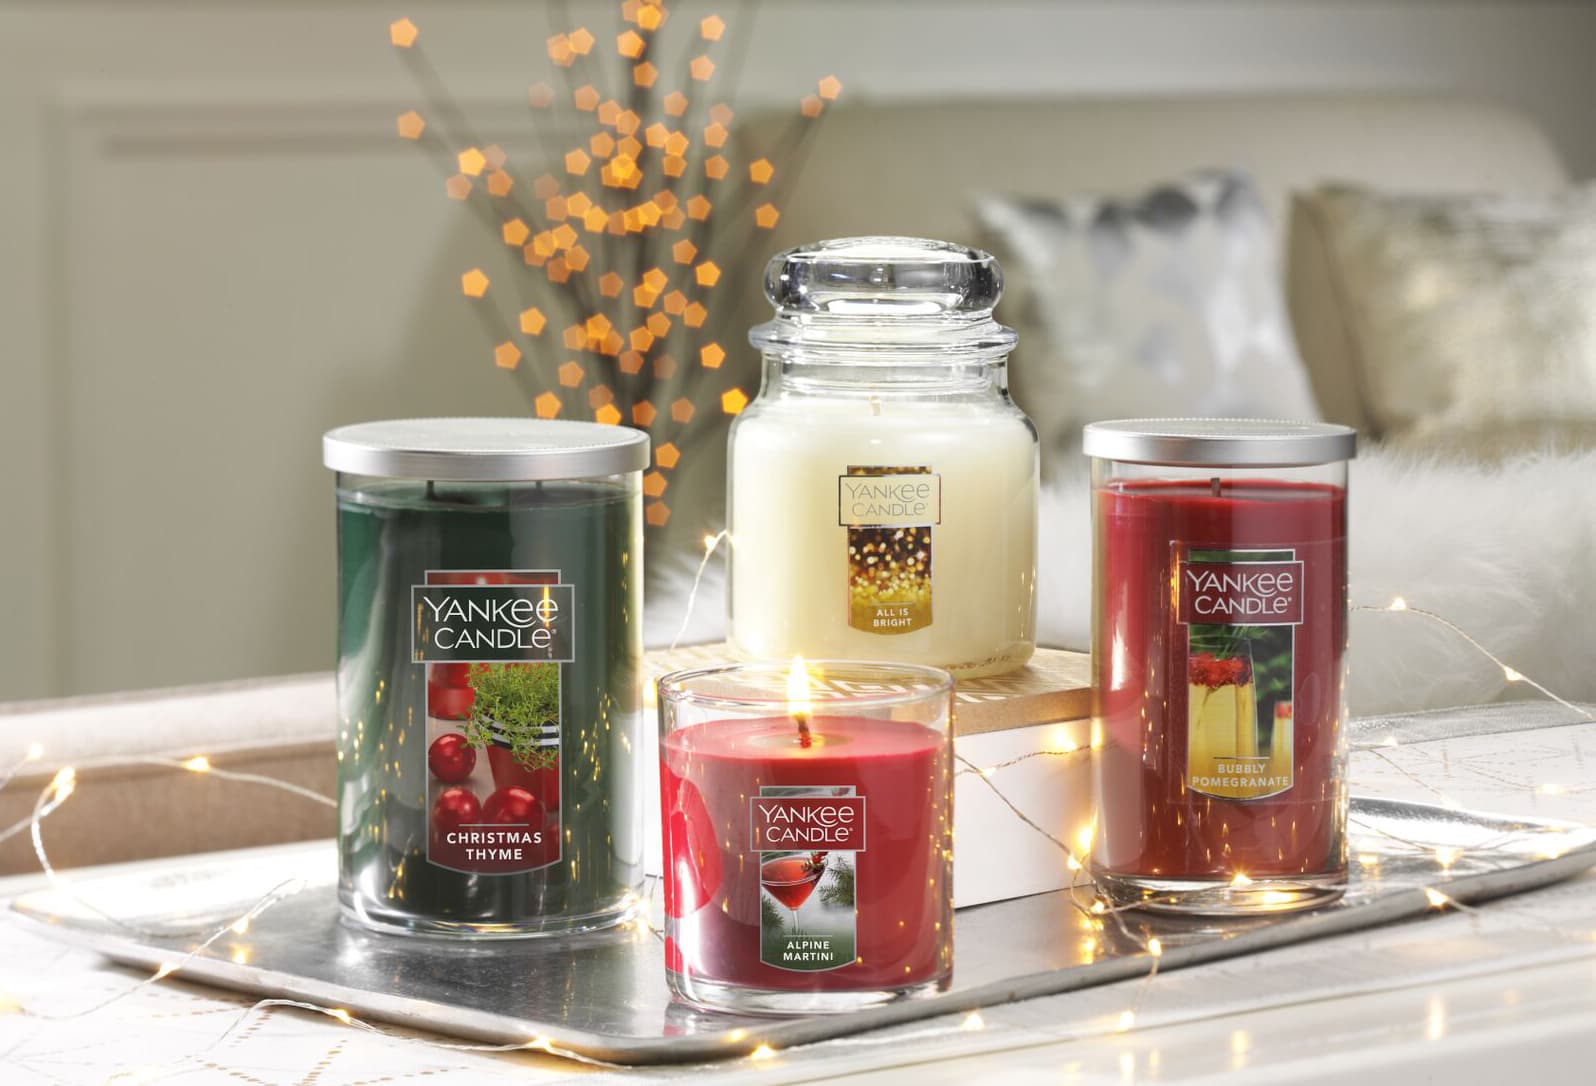 Yankee Candle candles are on sale at